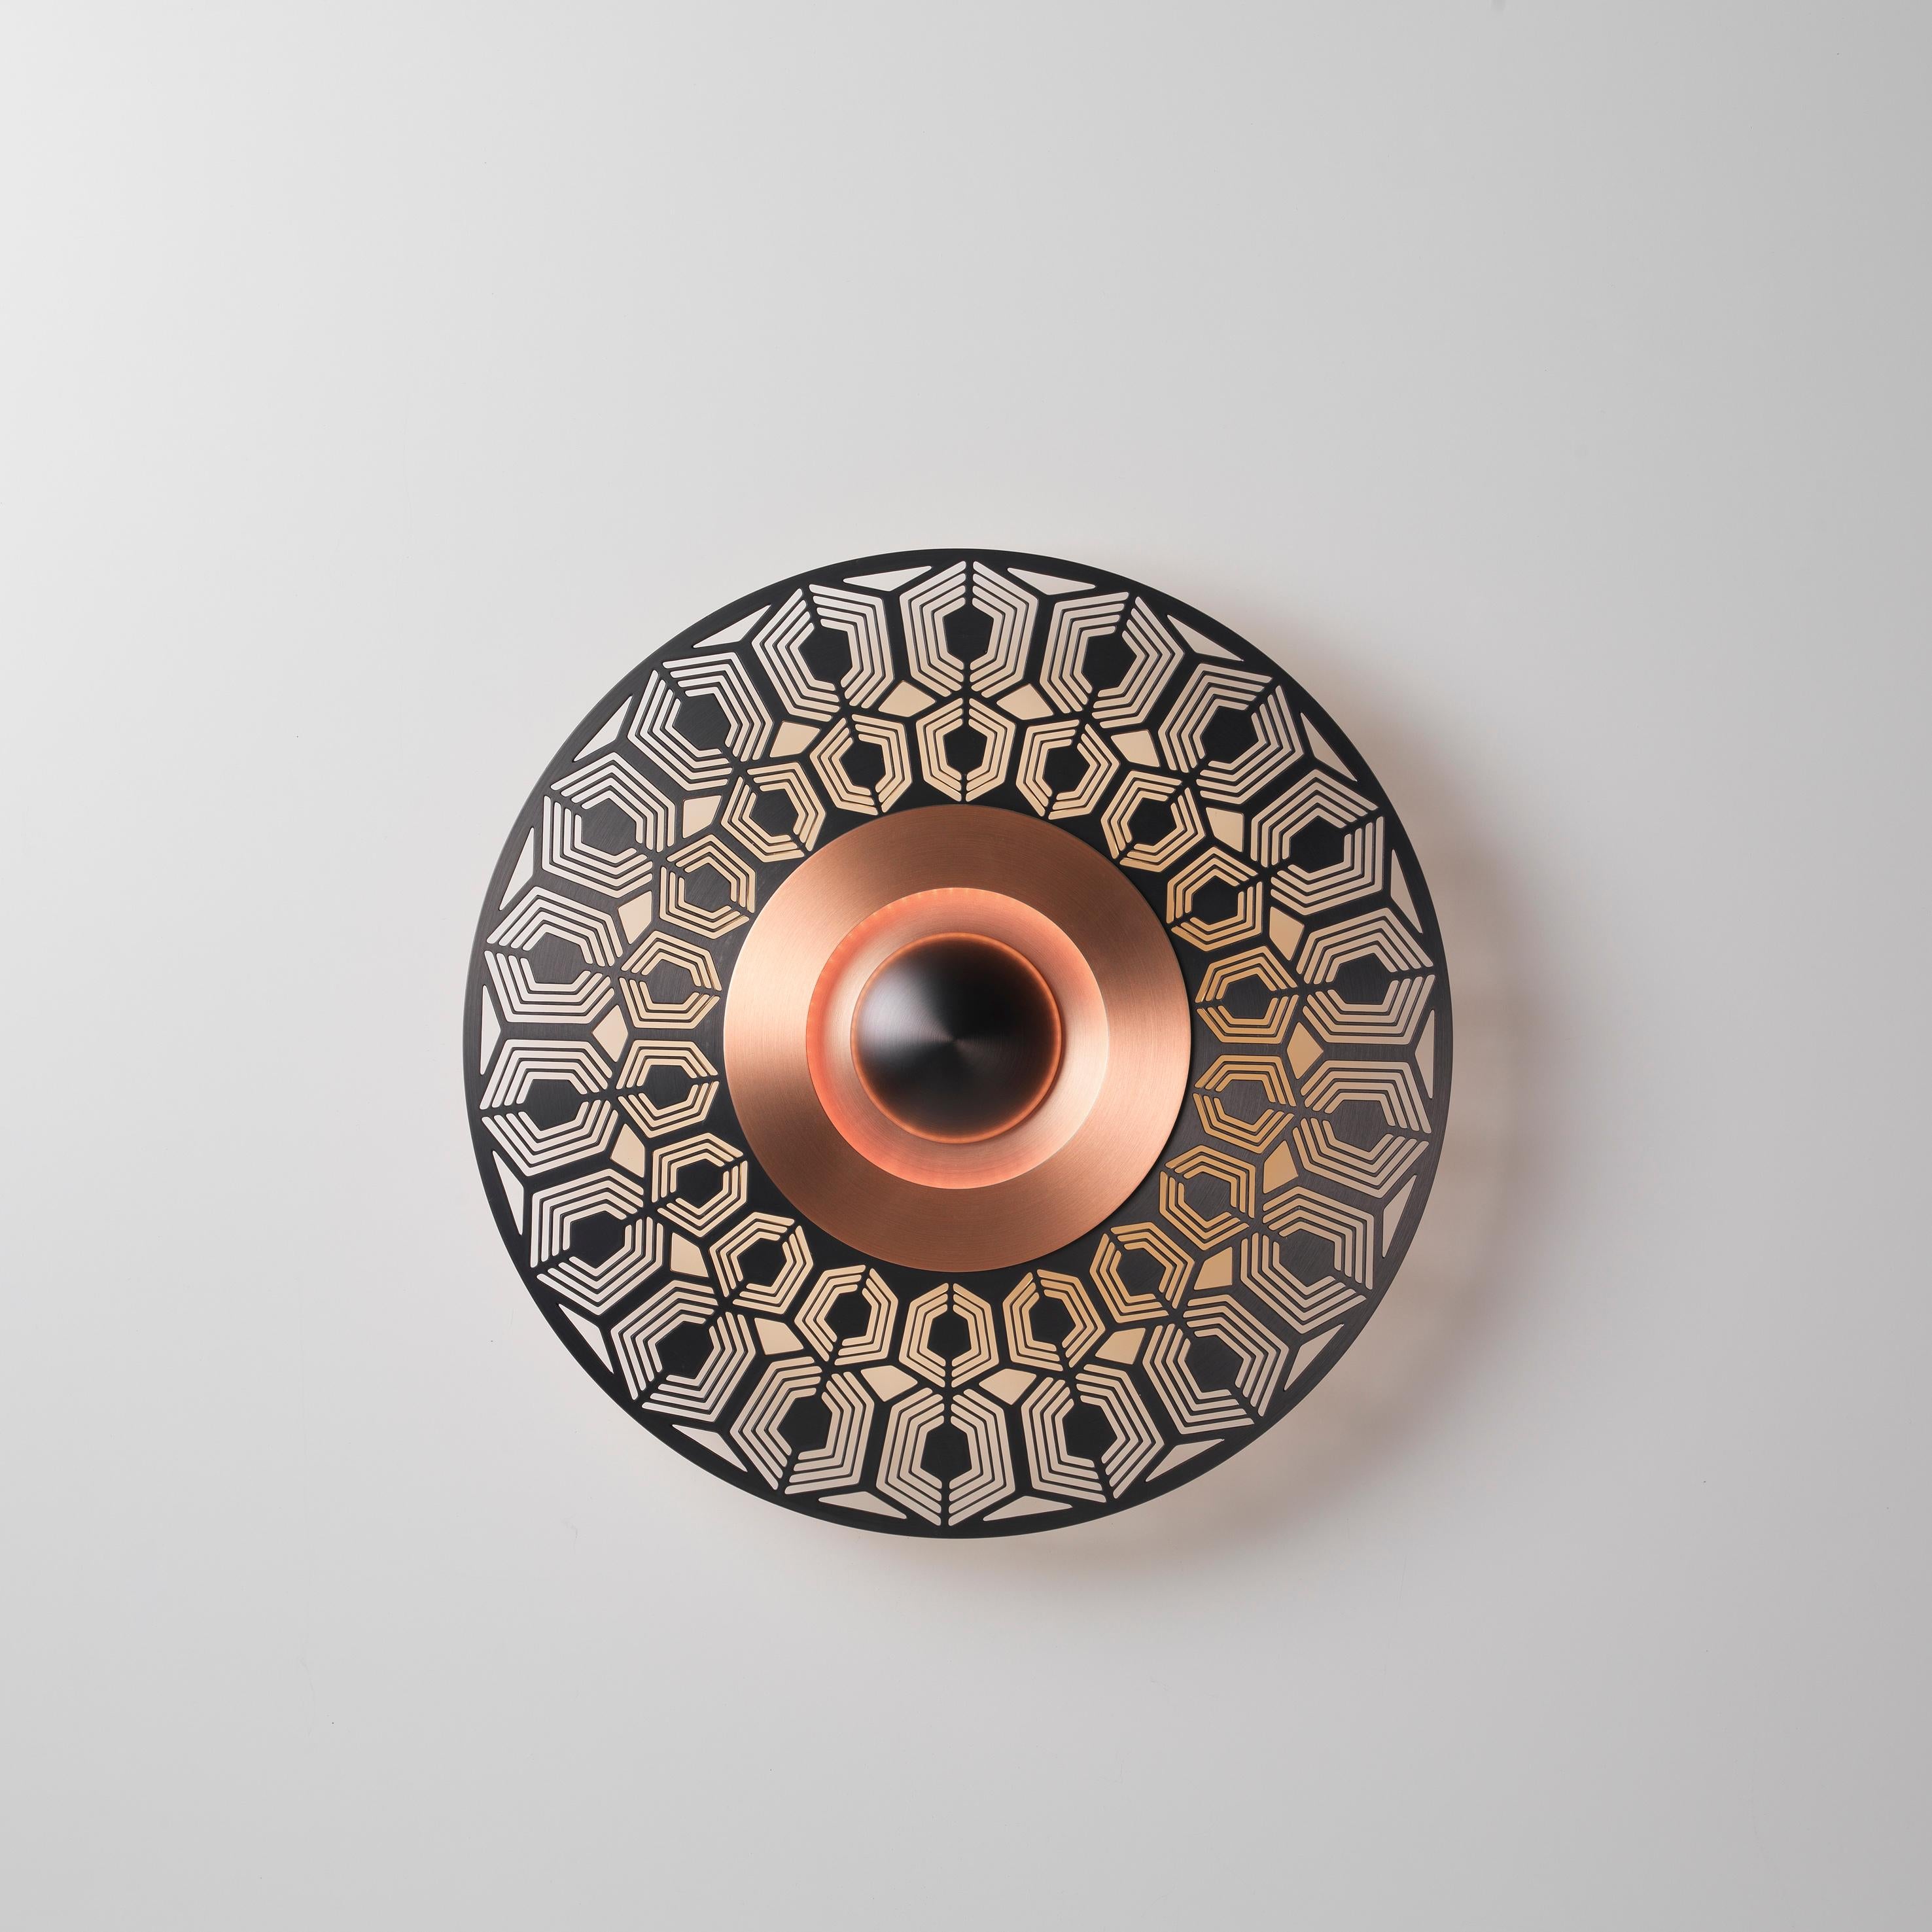 Earth Turtle wall light by Emilie Cathelineau
Dimensions: D33 X H5 cm
Materials: Solid brass,Polycarbonate diffuser.
Others finishes and dimensions are available.

All our lamps can be wired according to each country. If sold to the USA it will